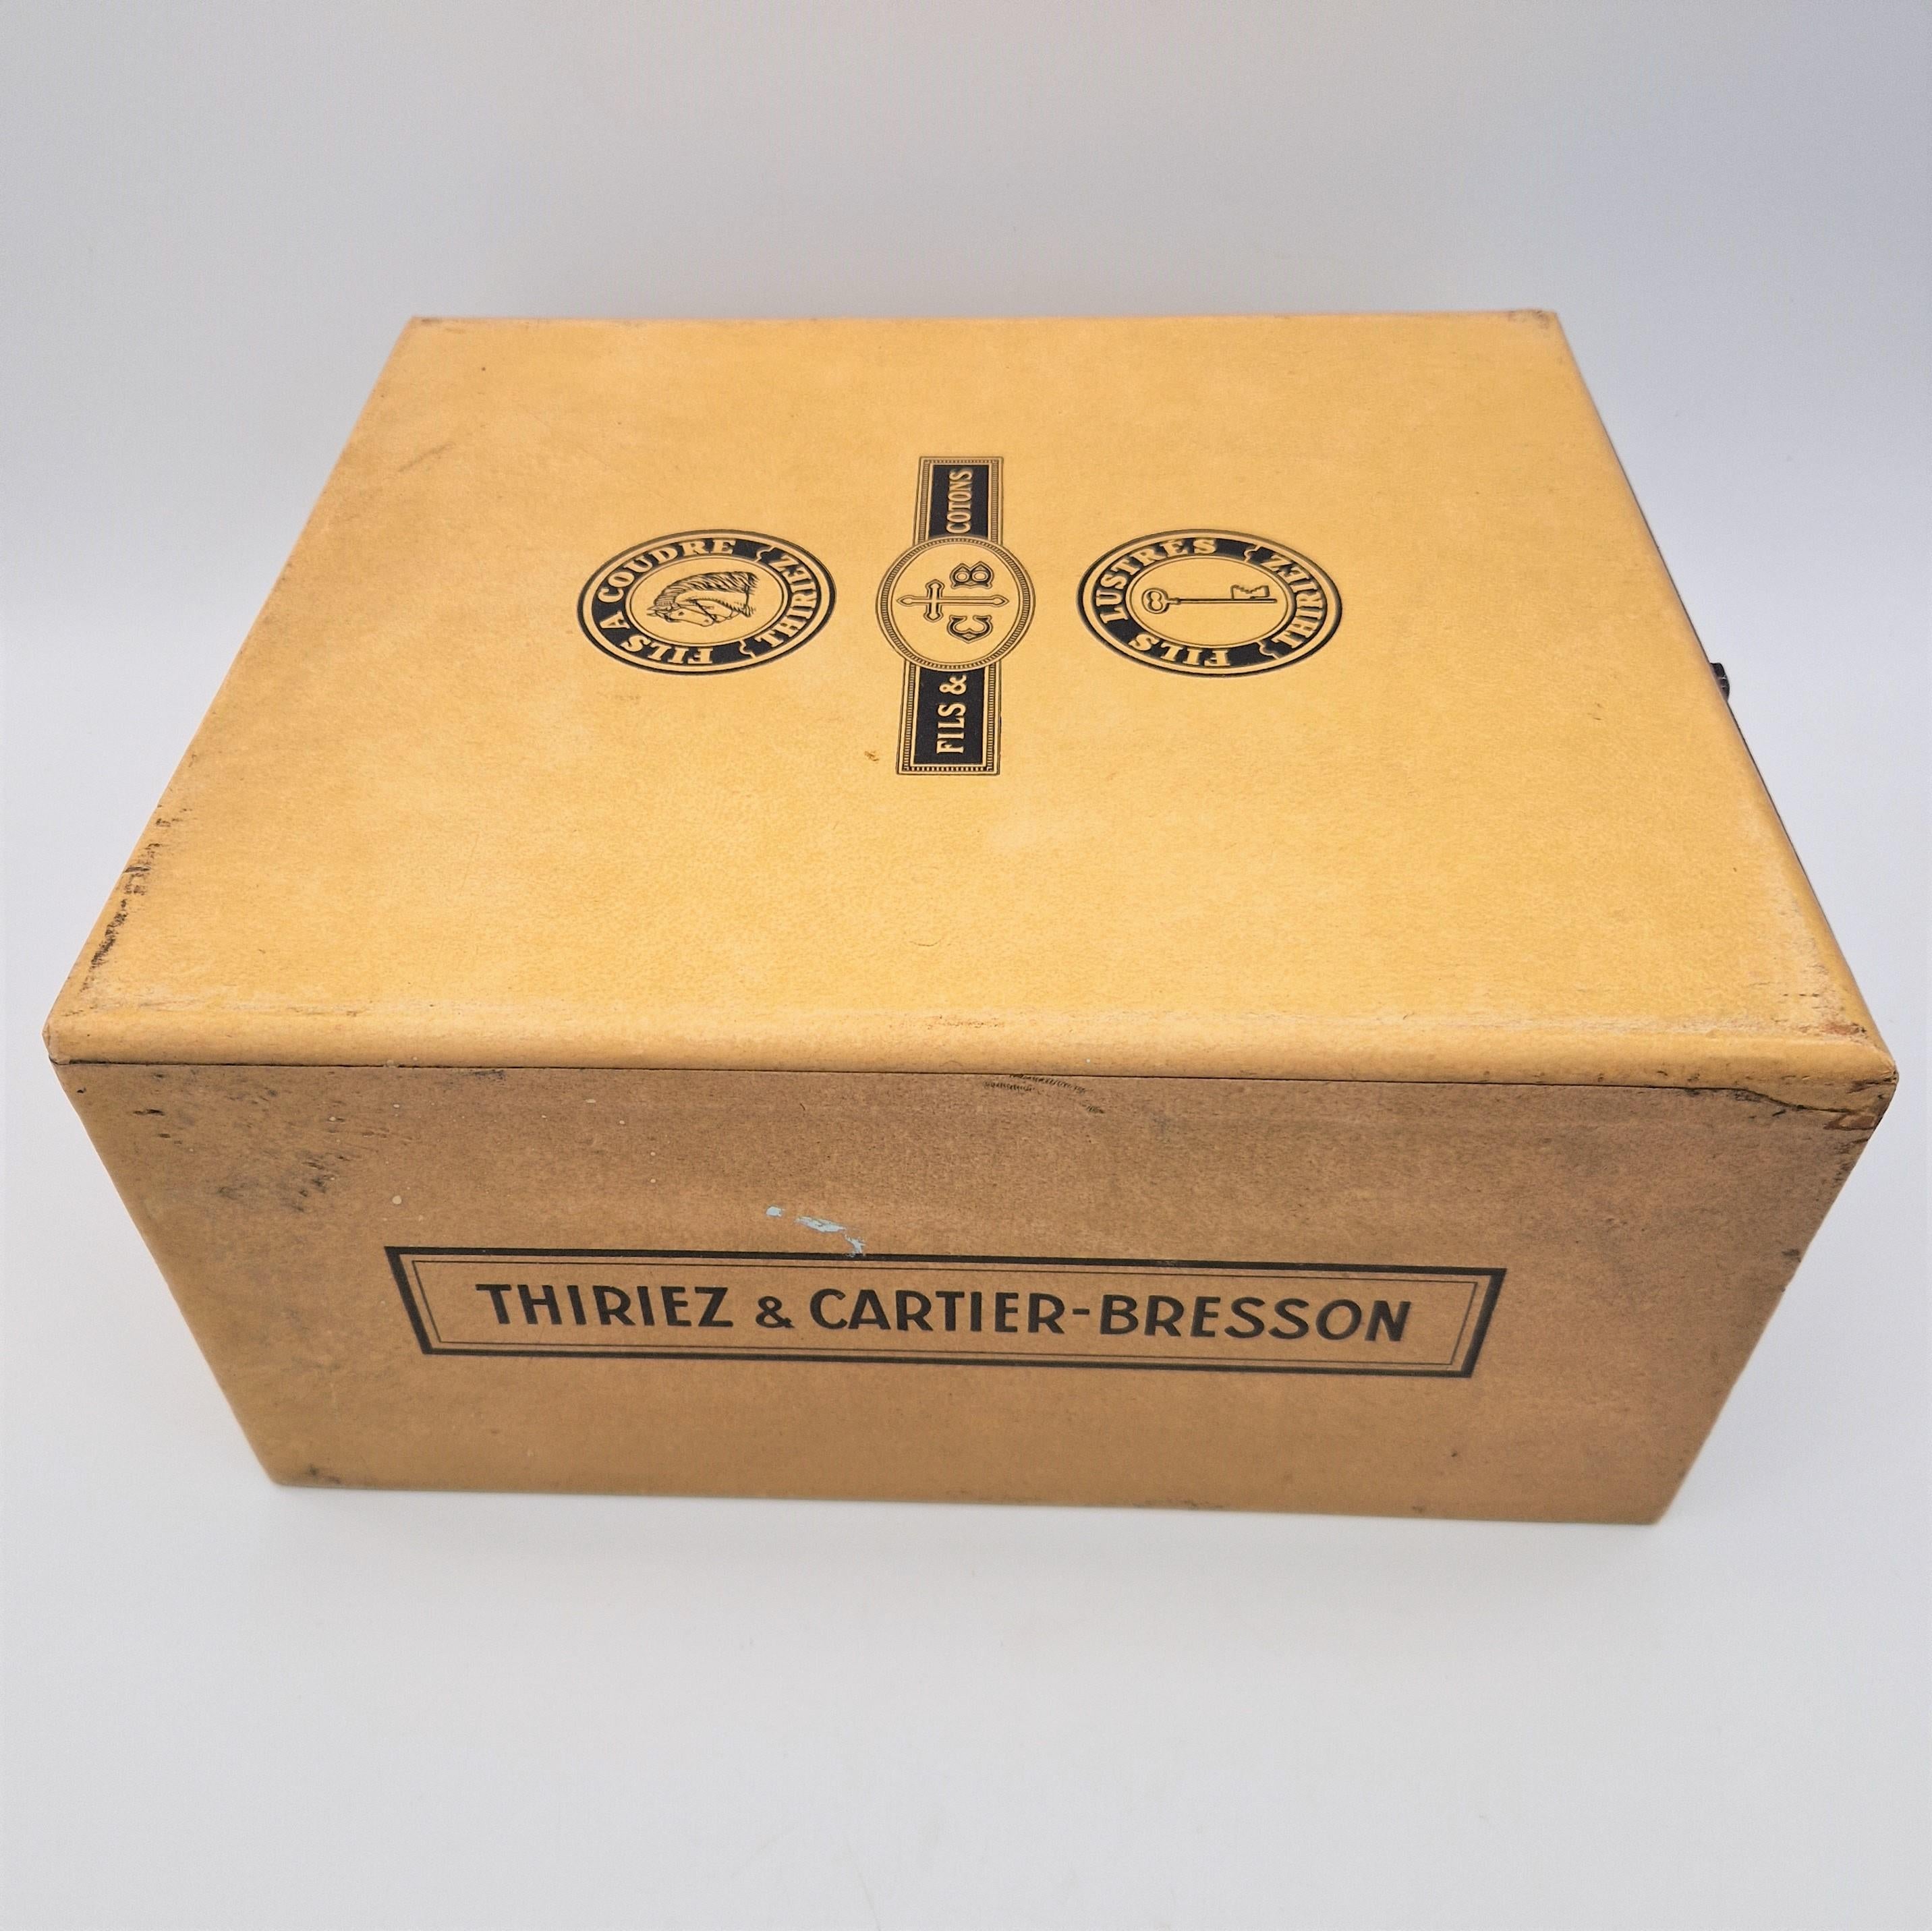 Haberdashery chest of drawers by Thiriez & Cartier Bresson. 1910 - 1920 For Sale 2